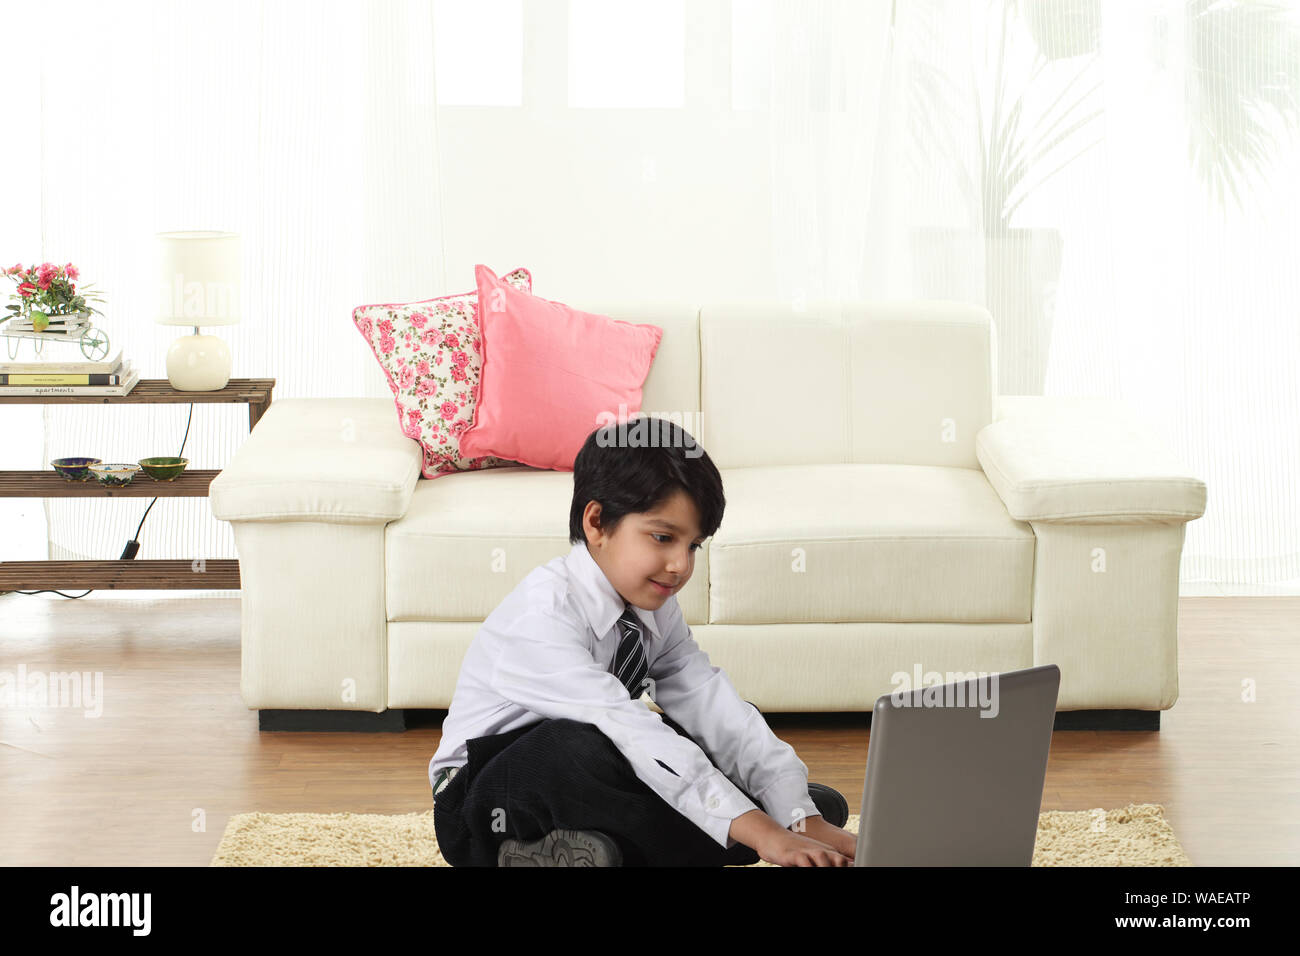 Schoolboy sitting on floor and using laptop Stock Photo